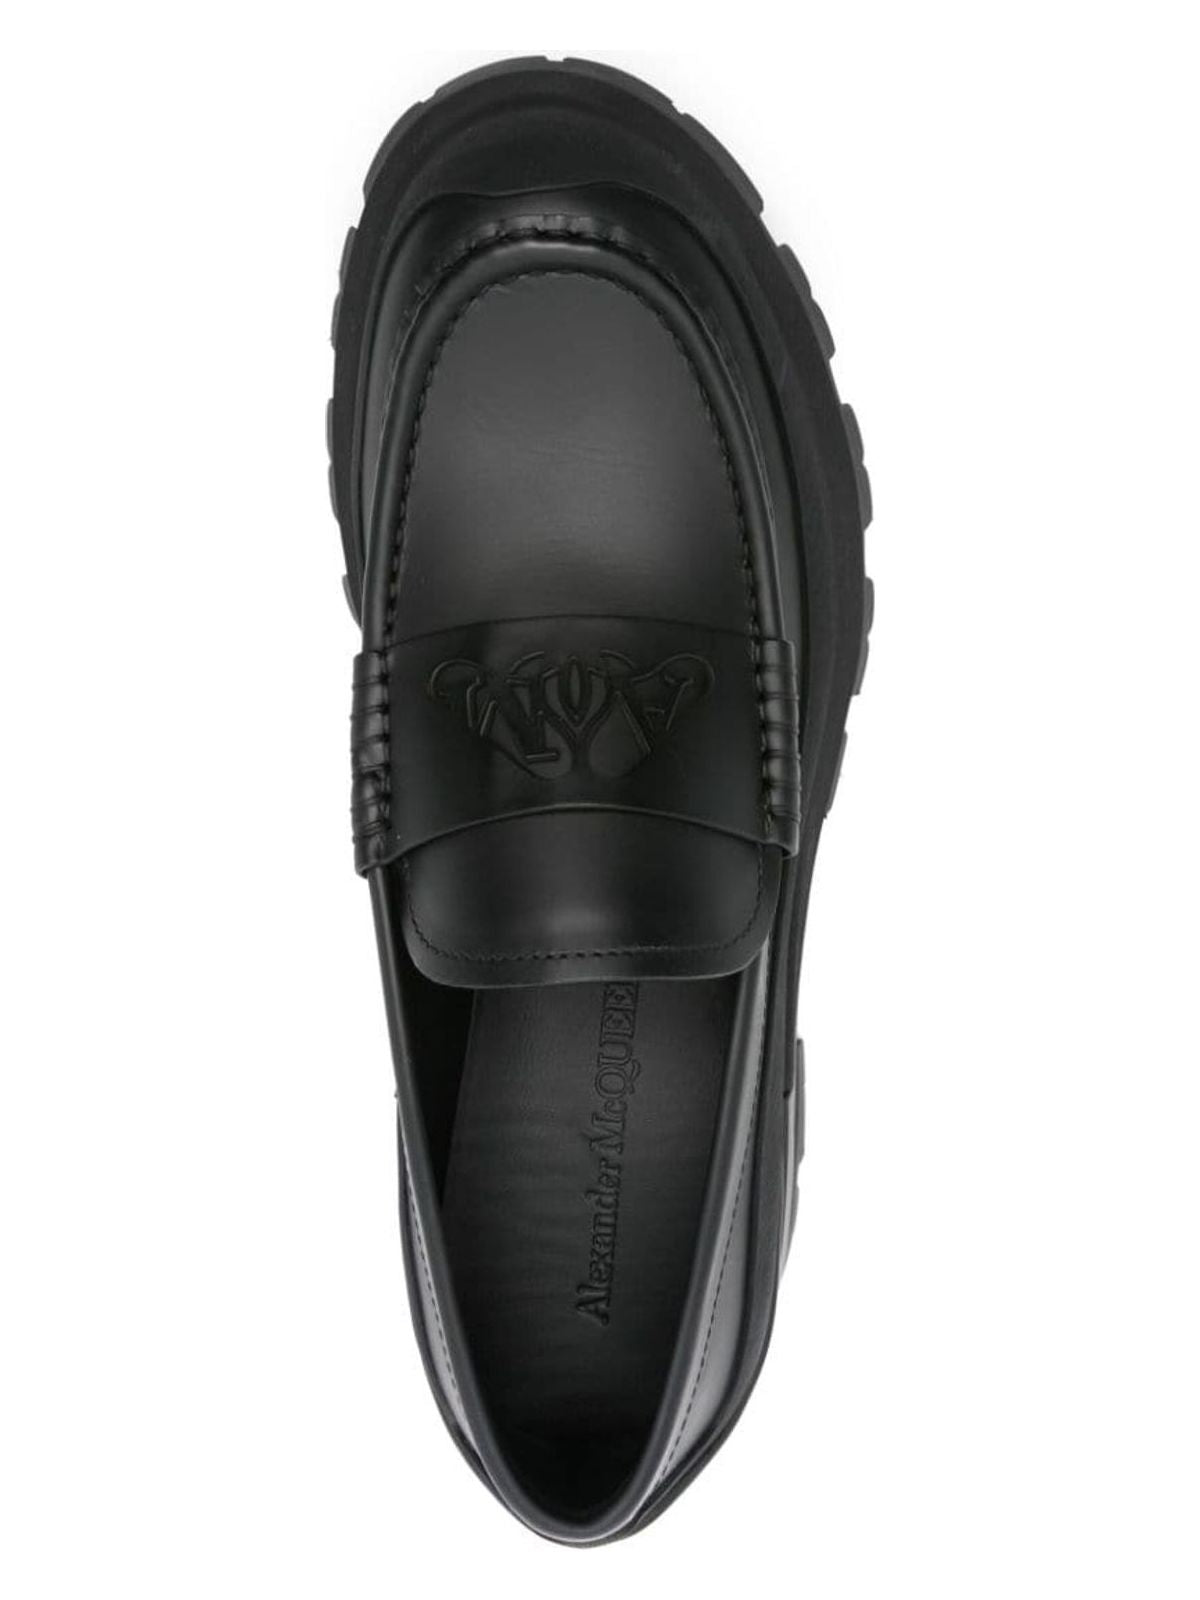 WIEQ41000 ALEXANDER MCQUEEN SEAL LOGO LEATHER LOAFERS